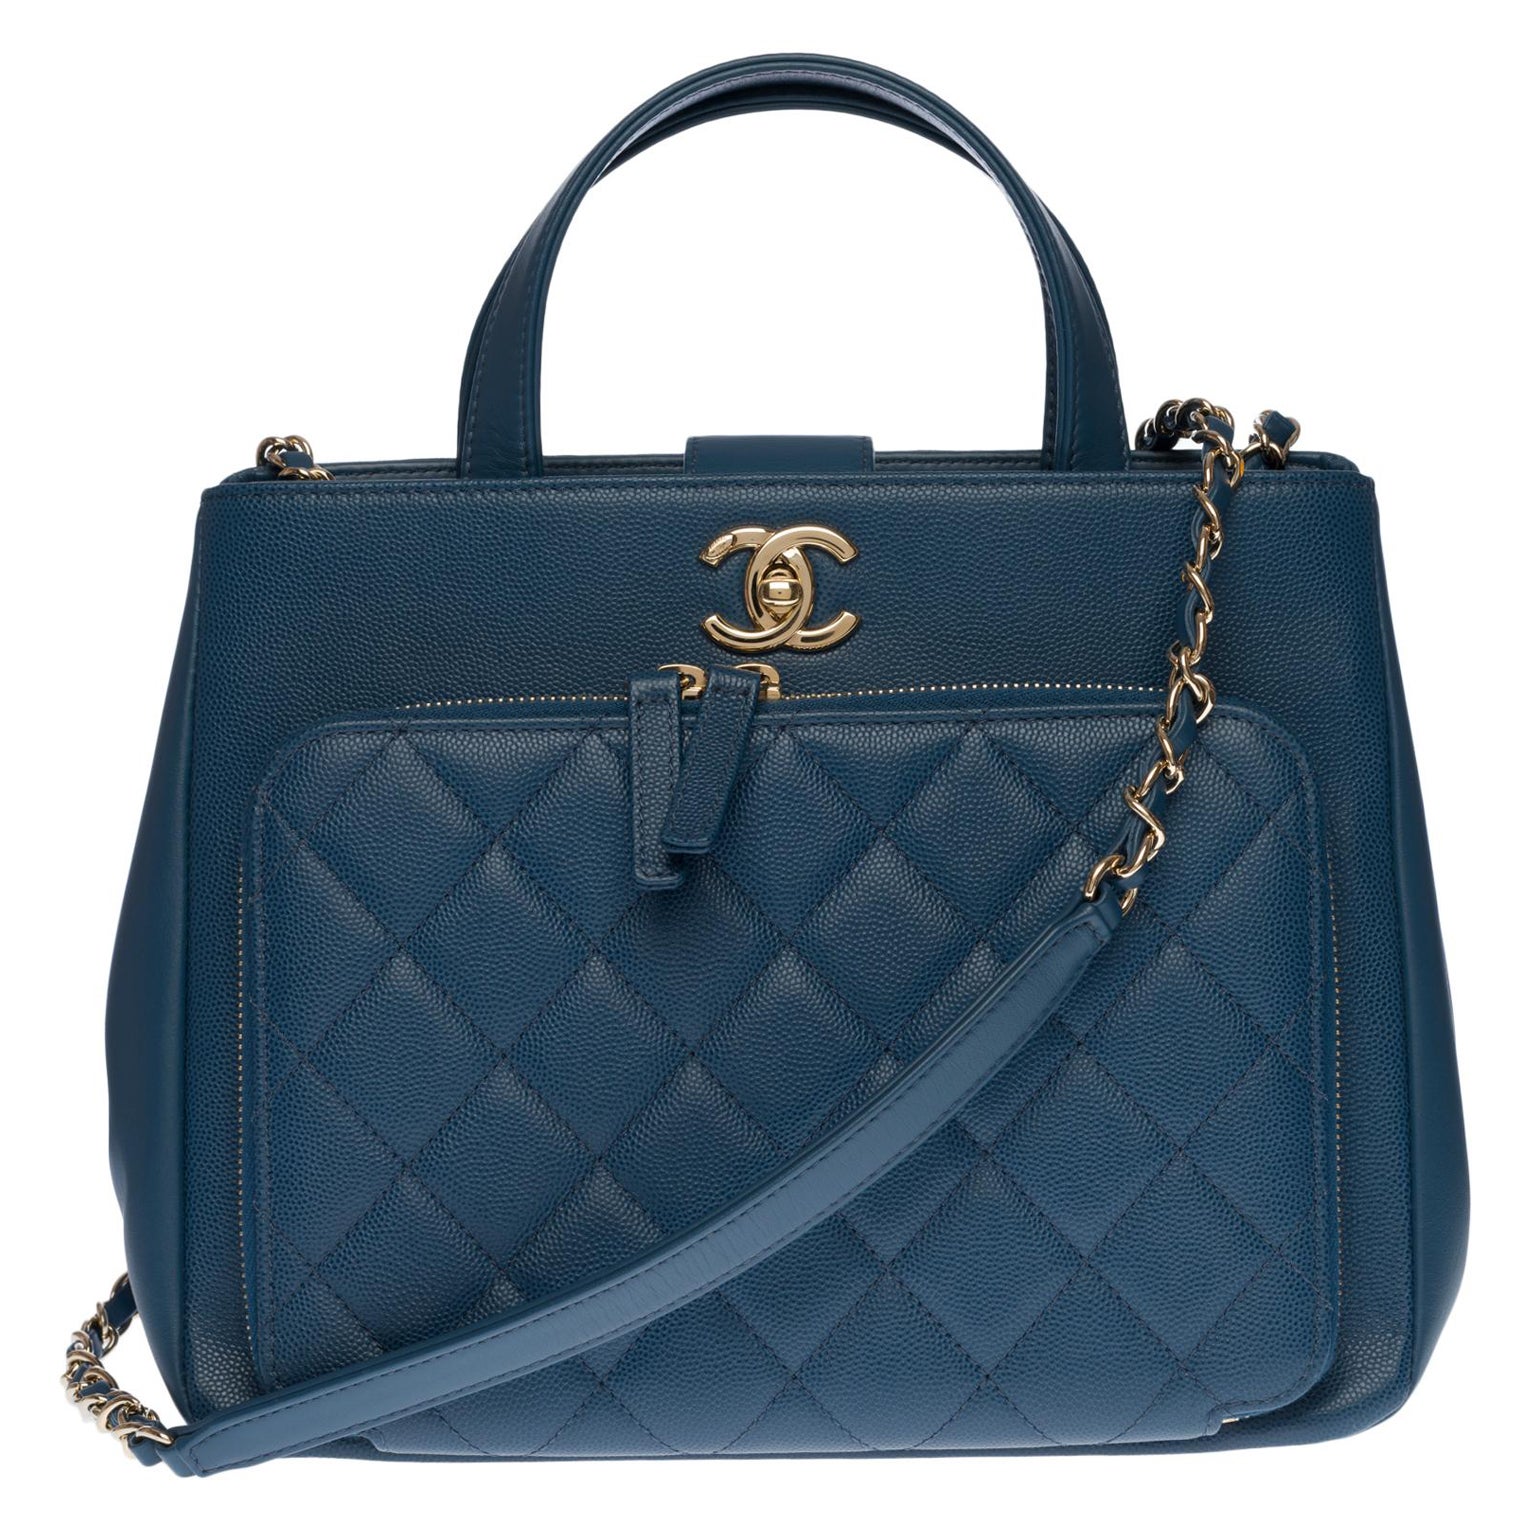 Chanel Business Affinity Tote bag in blue caviar quilted leather, GHW